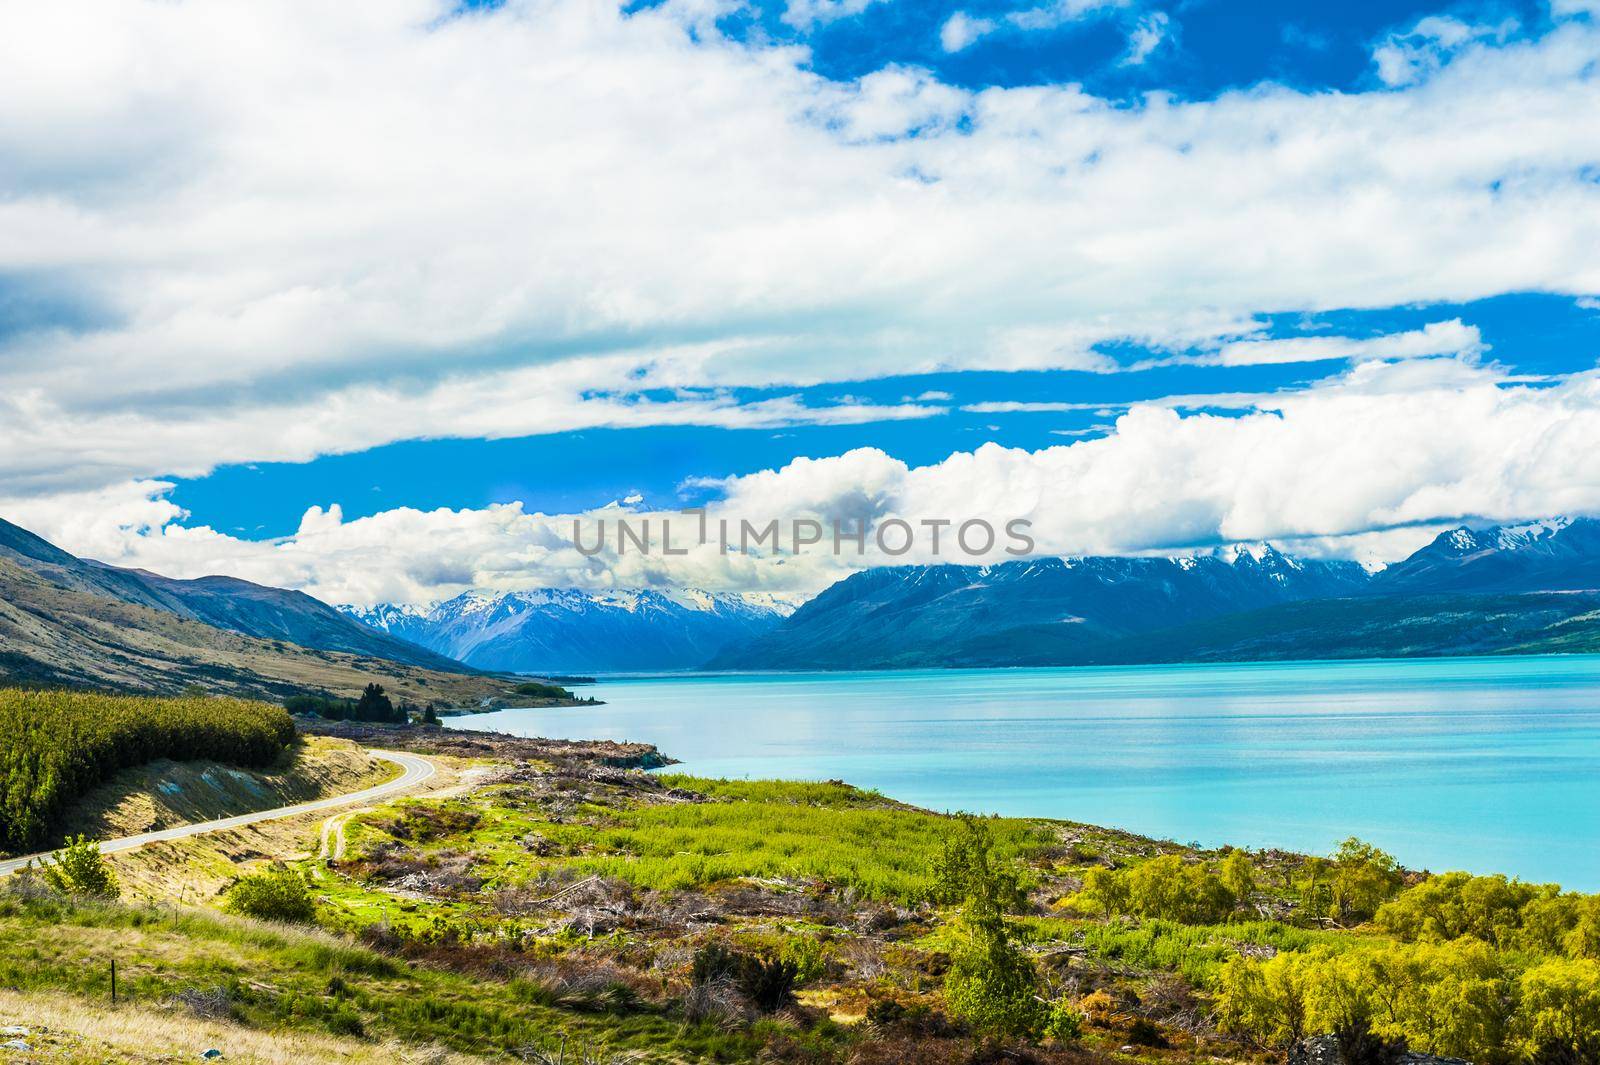 Mighty Mt. Cook is appearing from the clouds near the incredibly blue lake Pukaki at New Zealand